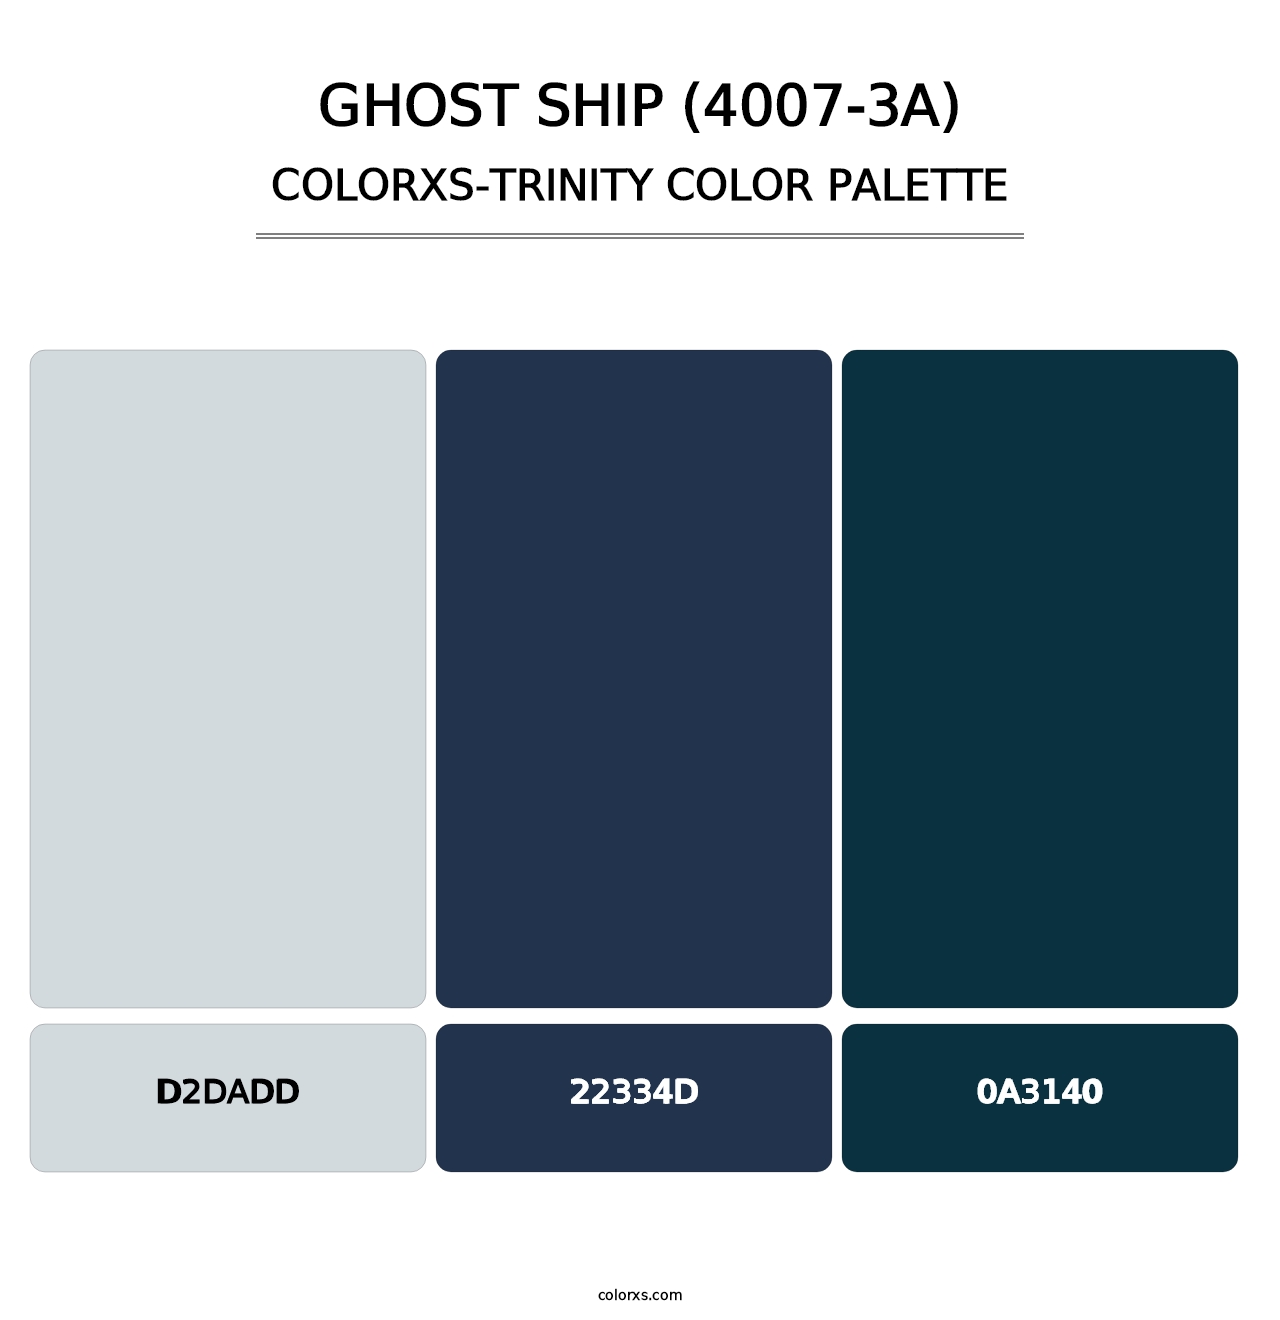 Ghost Ship (4007-3A) - Colorxs Trinity Palette